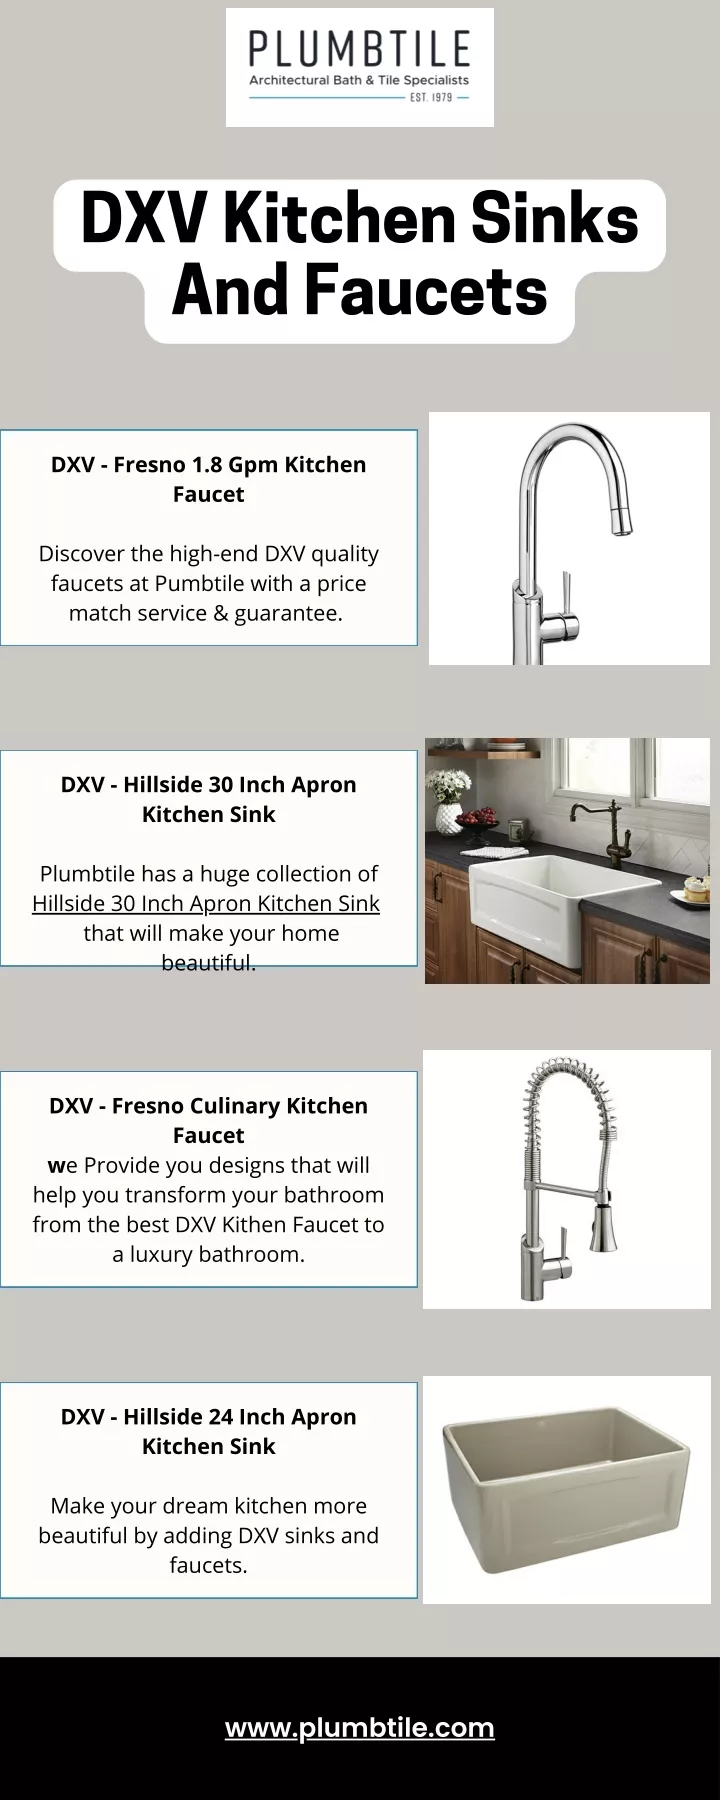 dxv kitchen sinks and faucets